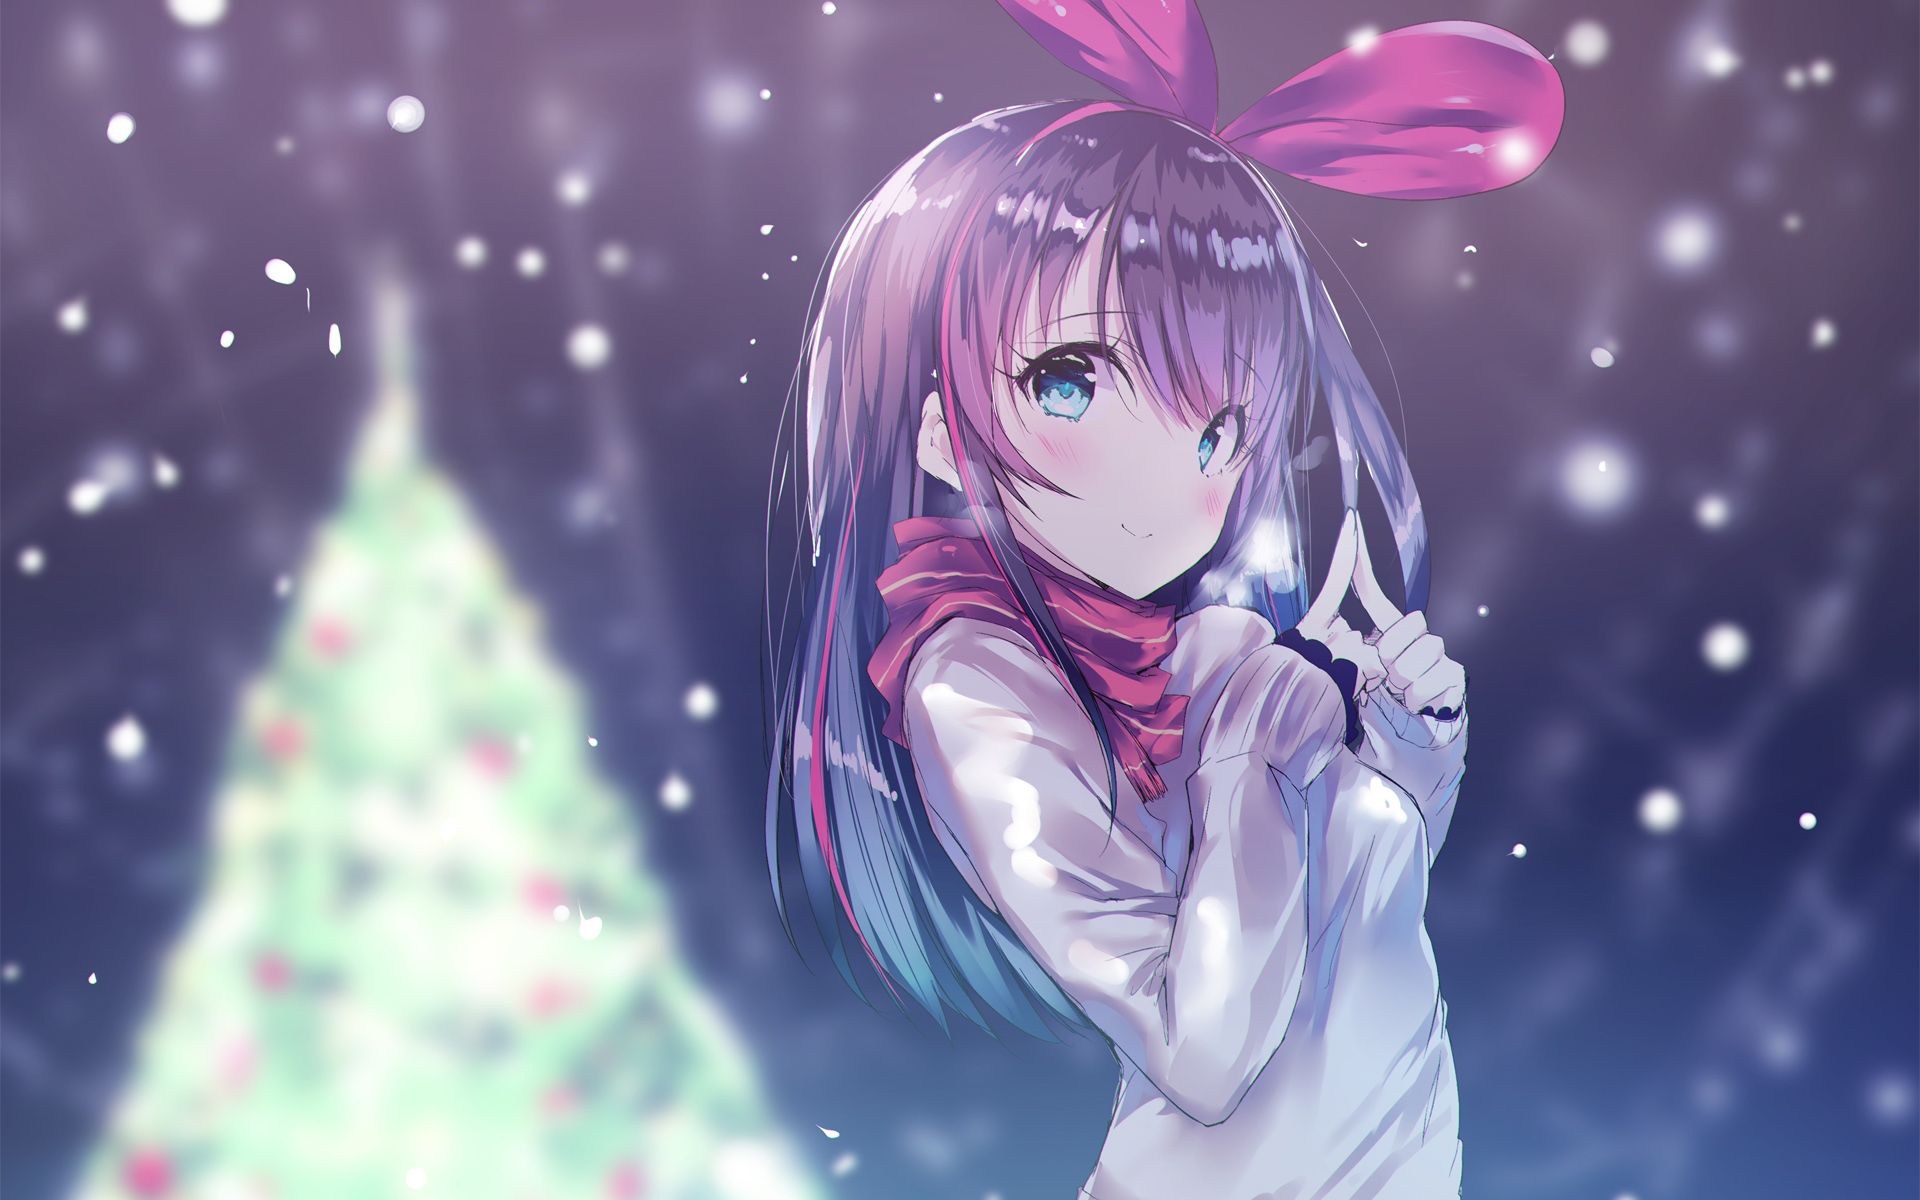 Download wallpaper Kizuna Ai, winter, xmas tree, anime characters, videobloger for desktop with resolution 1920x1200. High Quality HD picture wallpaper